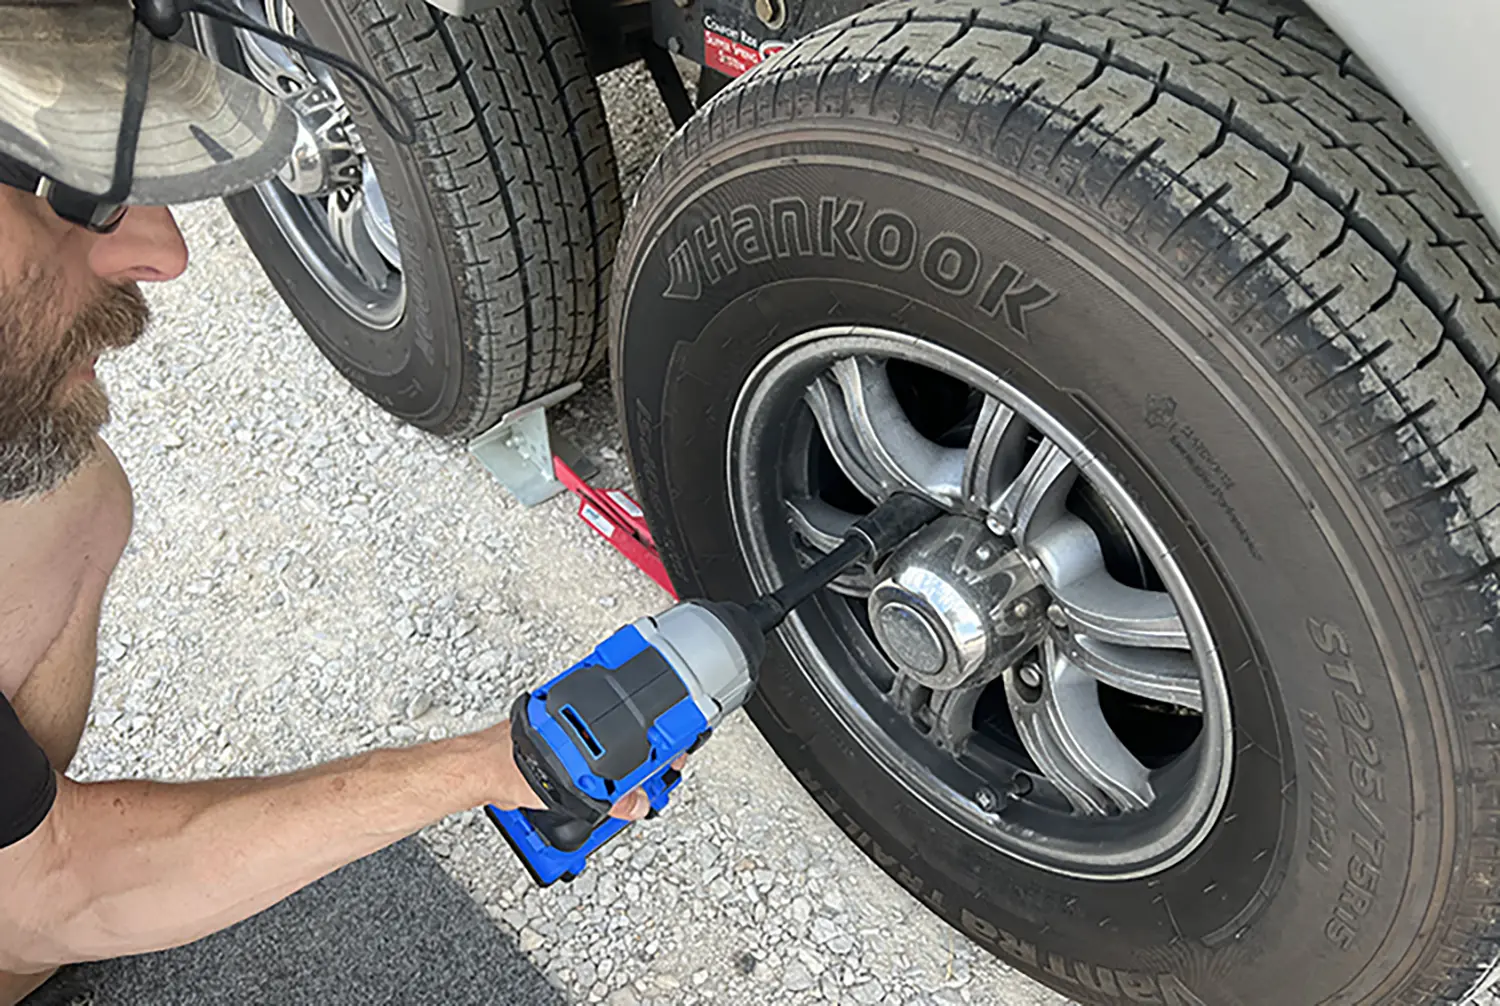 Close-up photograph perspective of a man in sunglasses and a hat holding a big blue/grey power tool drill locking a solid lug-nut cap of/into a trailer wheel